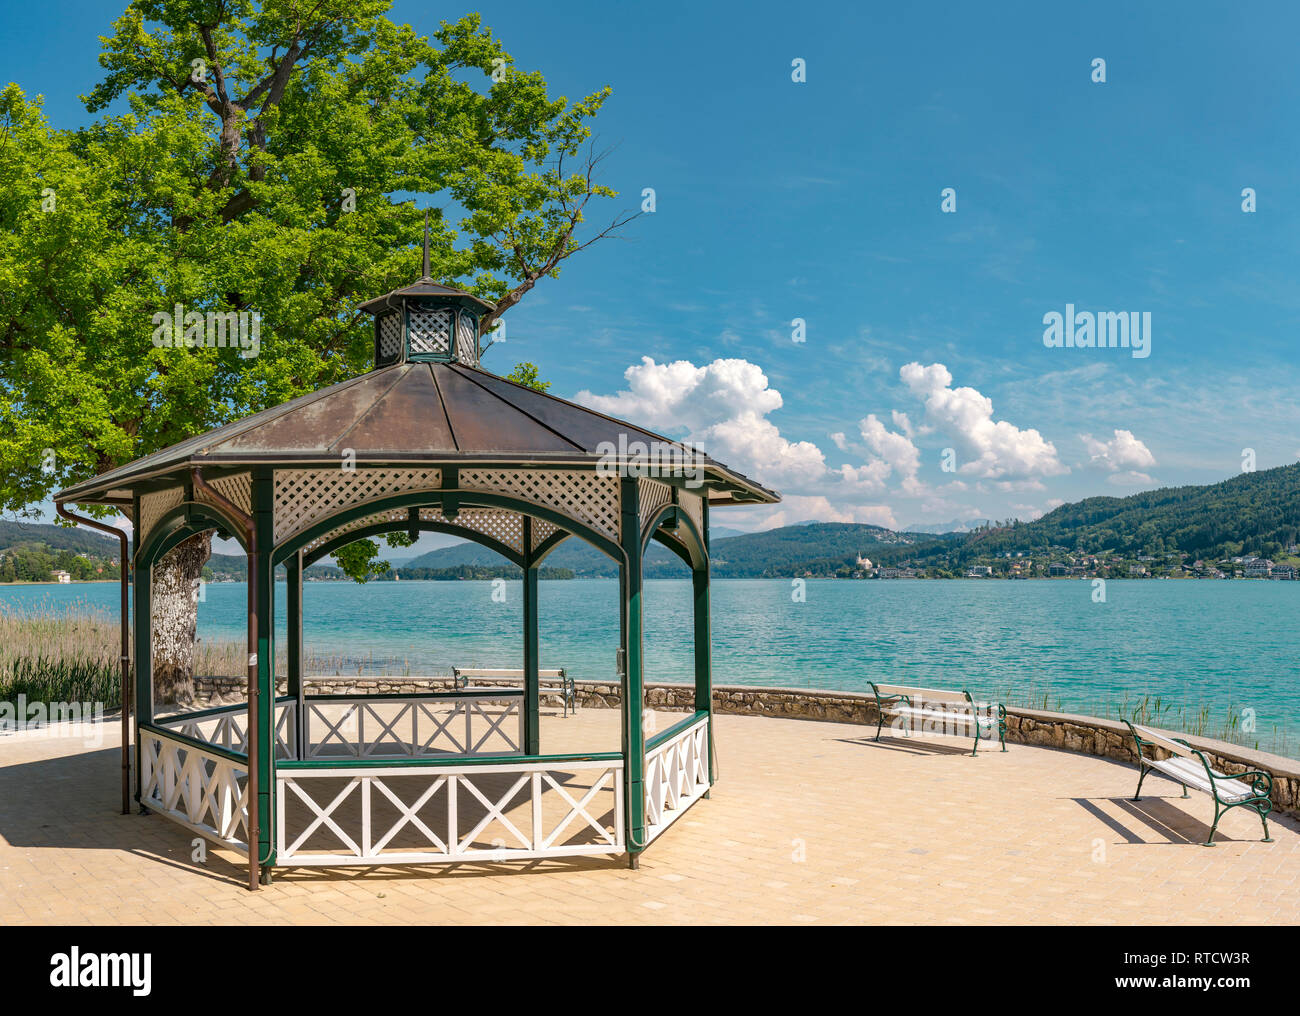 A gazebo with a view over the lake, Pörtschach am Wörthersee,   Österreich Austria *** Local Caption ***  landscape, water, trees, summer, mountains,  Stock Photo